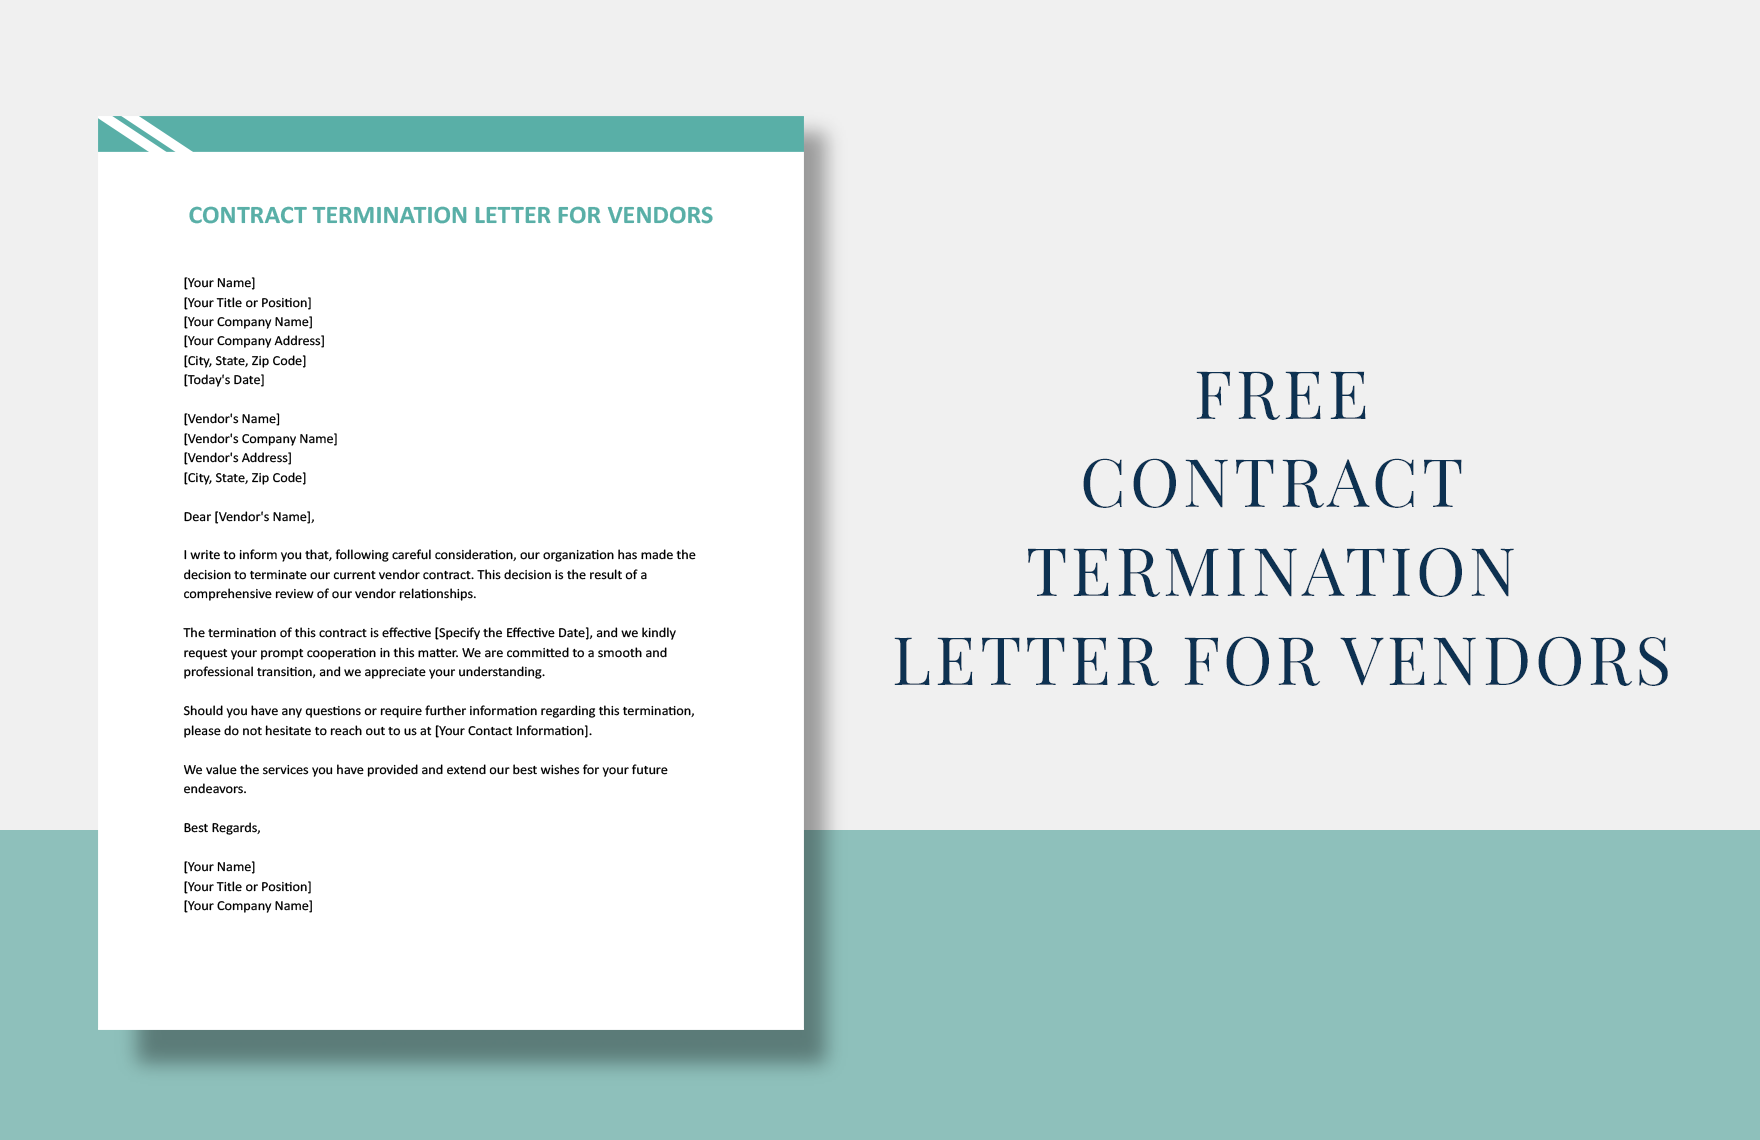 Contract Termination Letter For Vendors